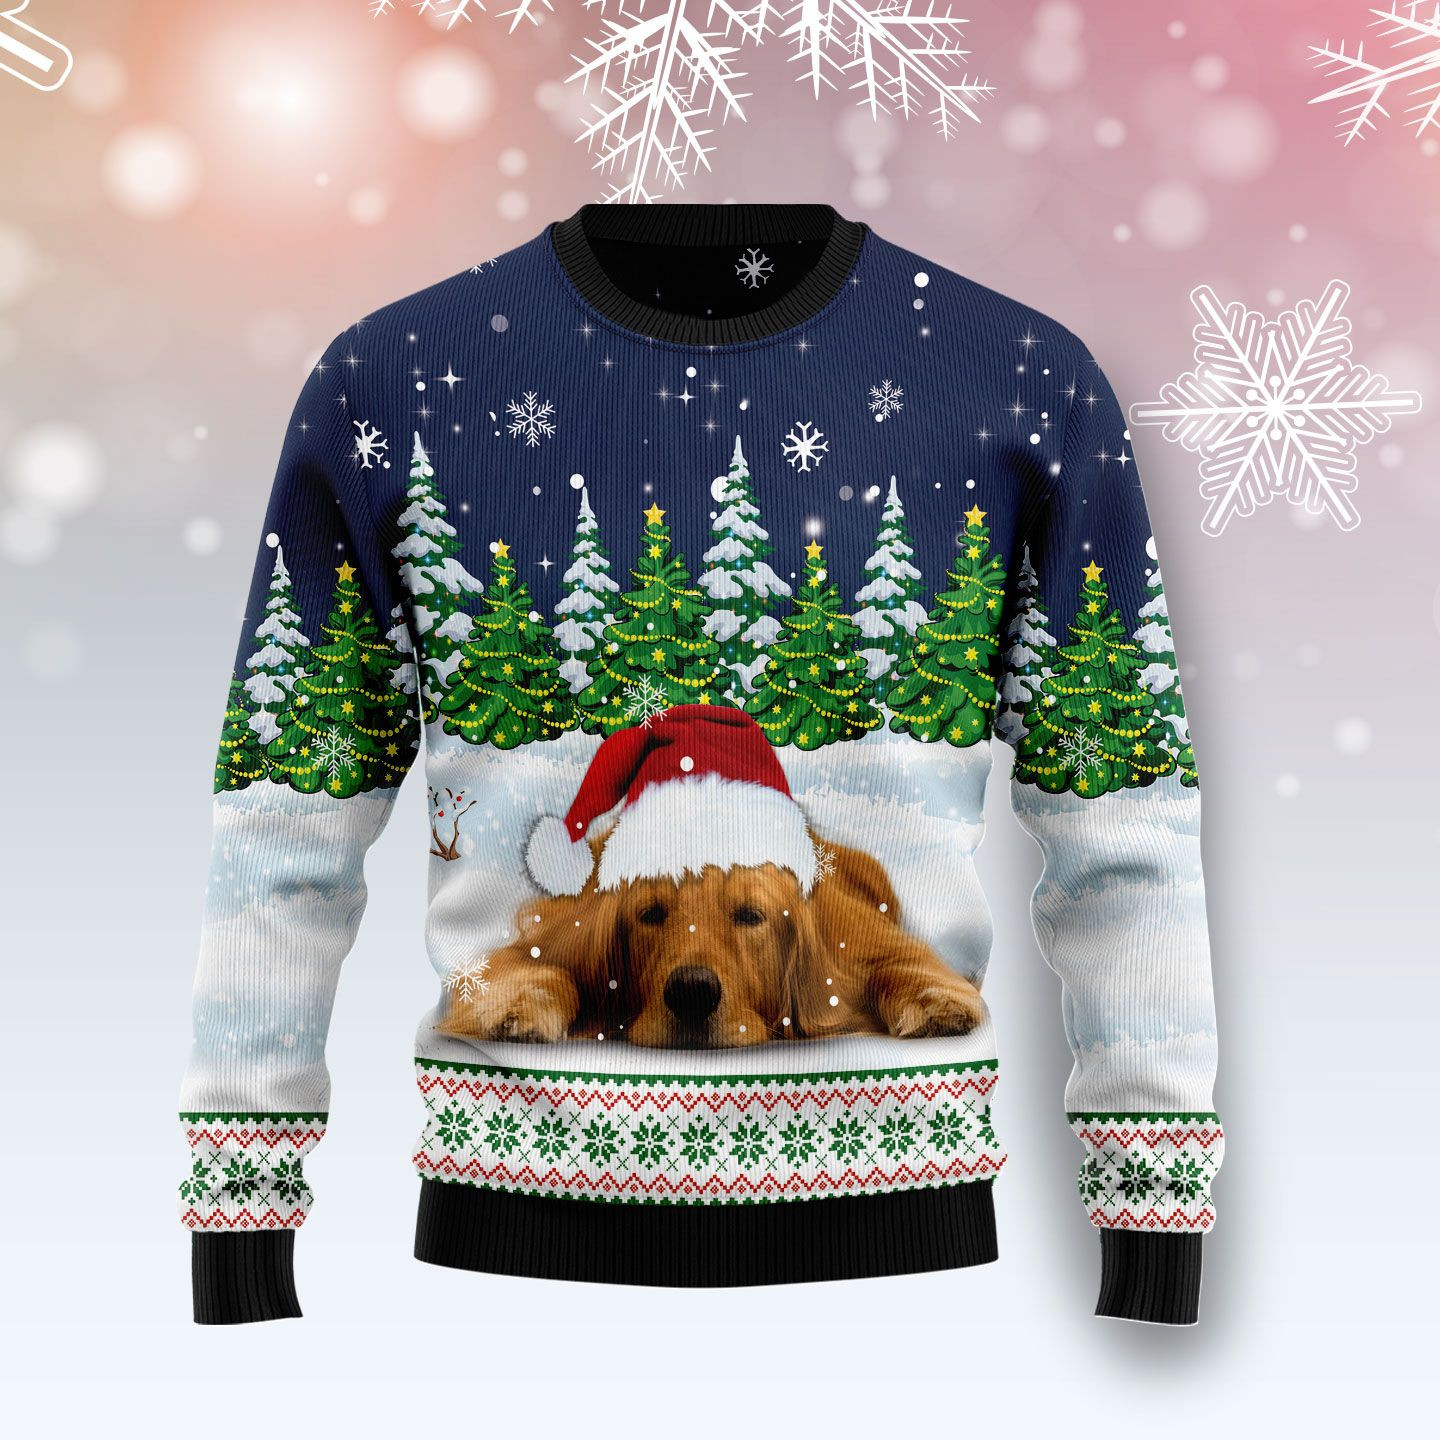 Dreaming Golden Retriever Under Snow Ugly Christmas Sweater Ugly Sweater For Men Women, Holiday Sweater